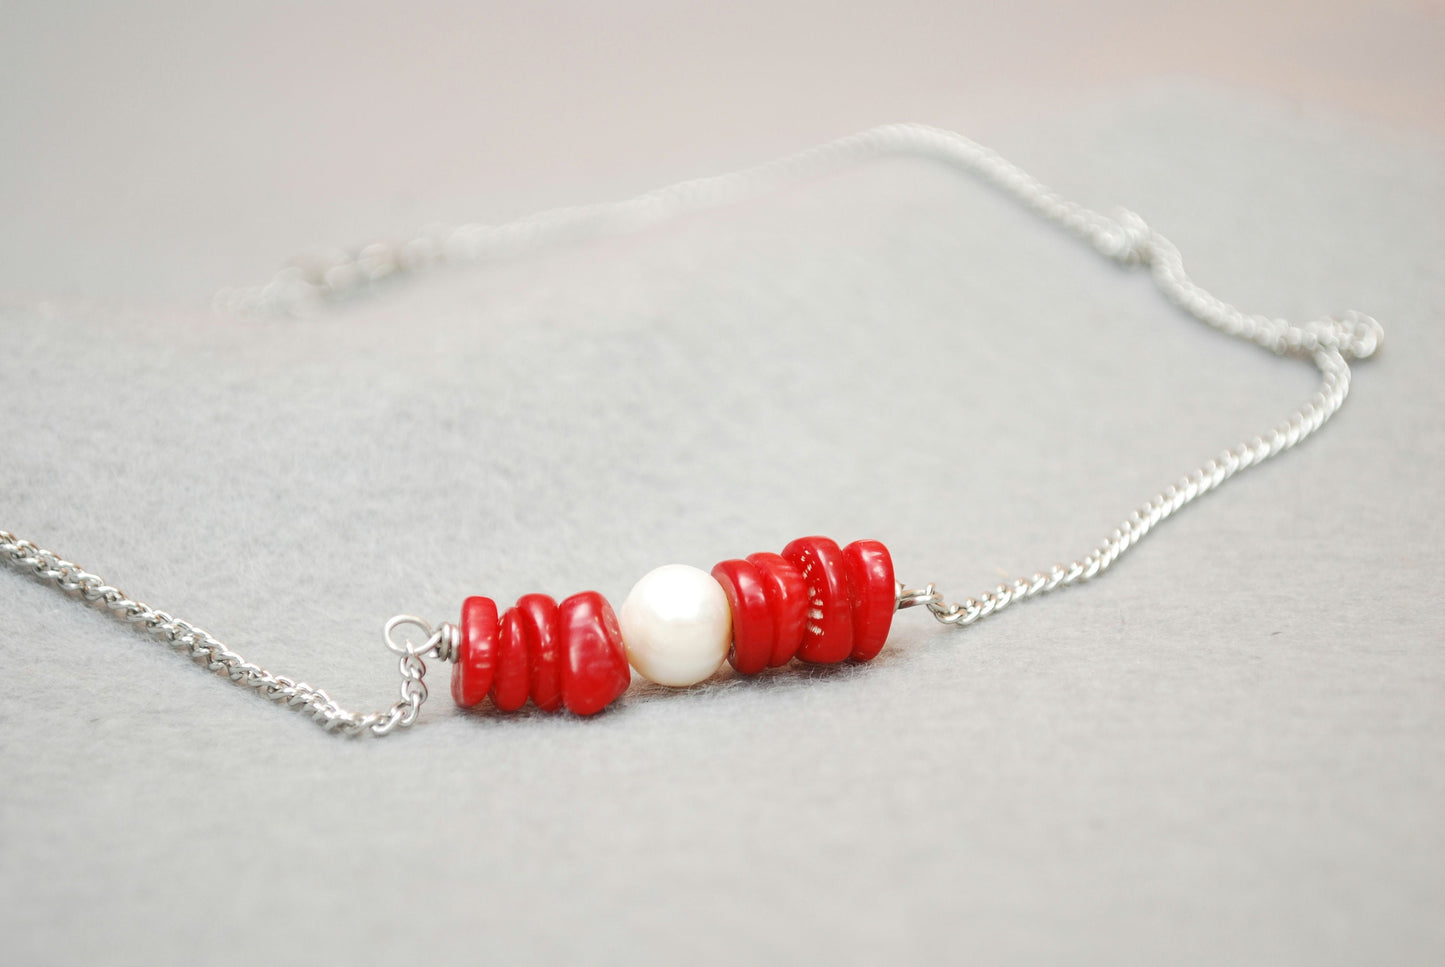 Ocean Breeze: Stainless Steel Necklace with Freshwater Pearl Center and Coral Stones. Estibela design.